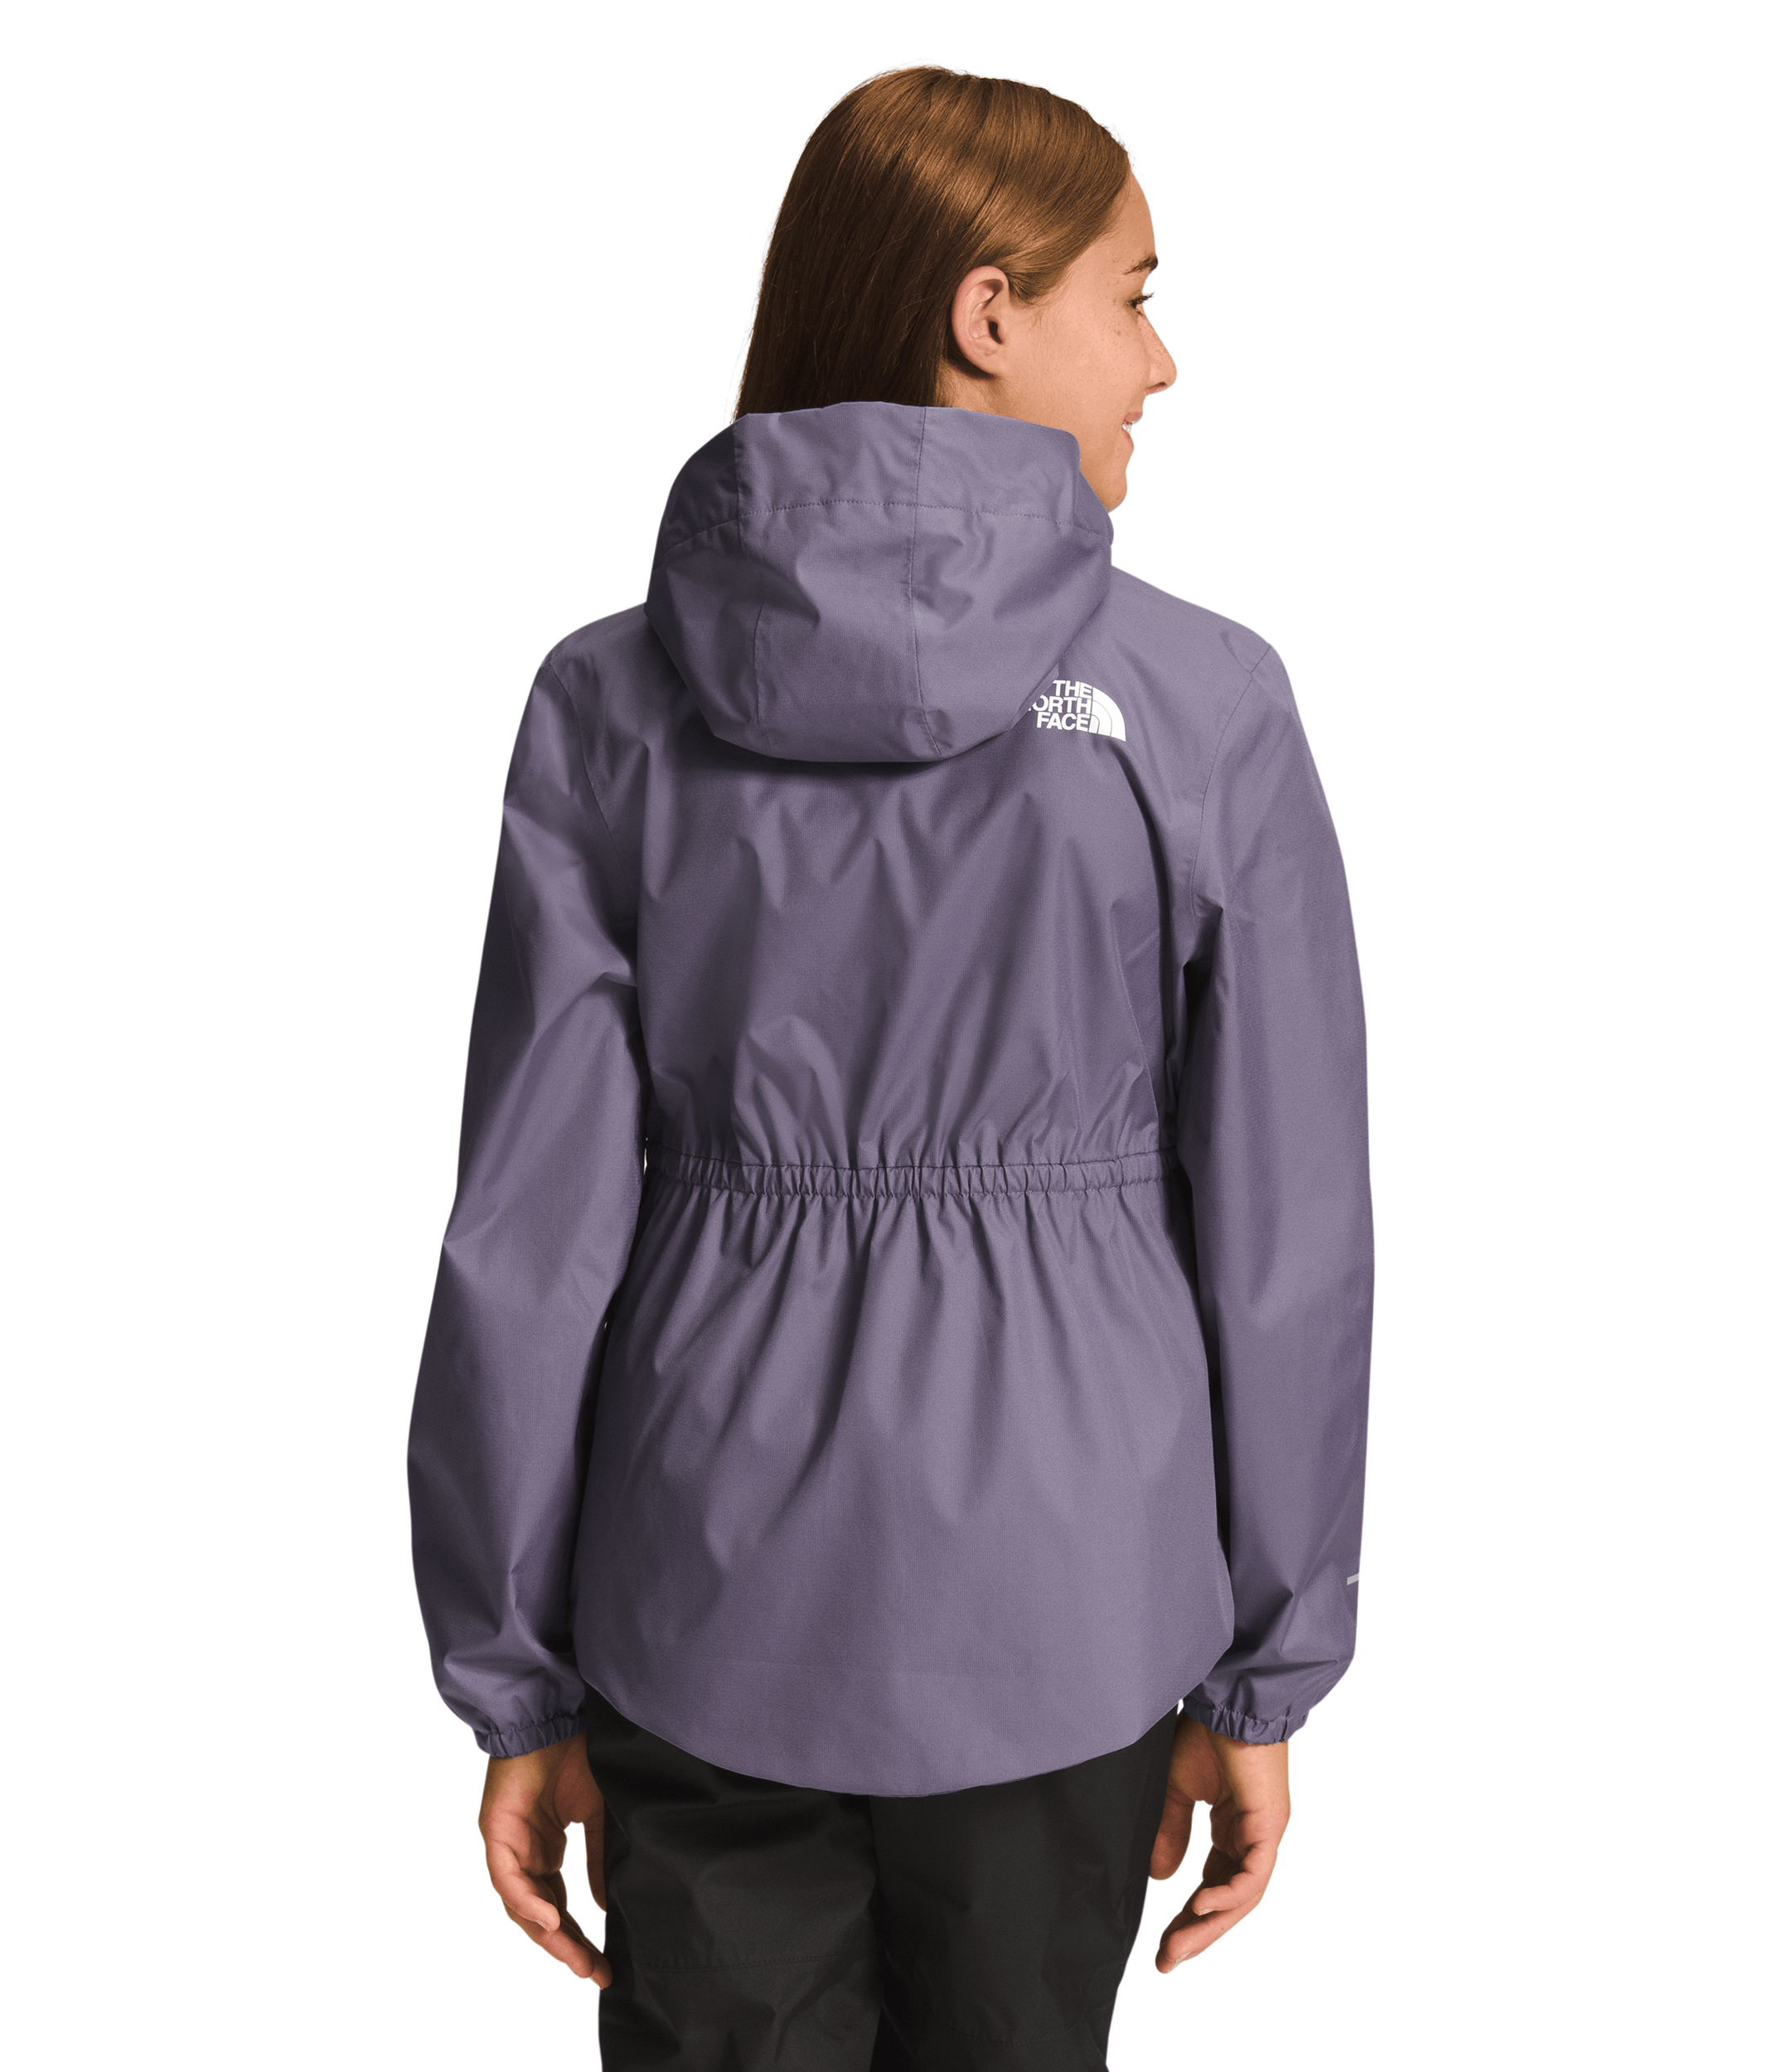 Back view of a Smiling girl wearing Lunar Slate The North Face Girls' Warm Storm Jacket - Mountain Kids Outfitters: Stylish and Weather-Ready Outerwear